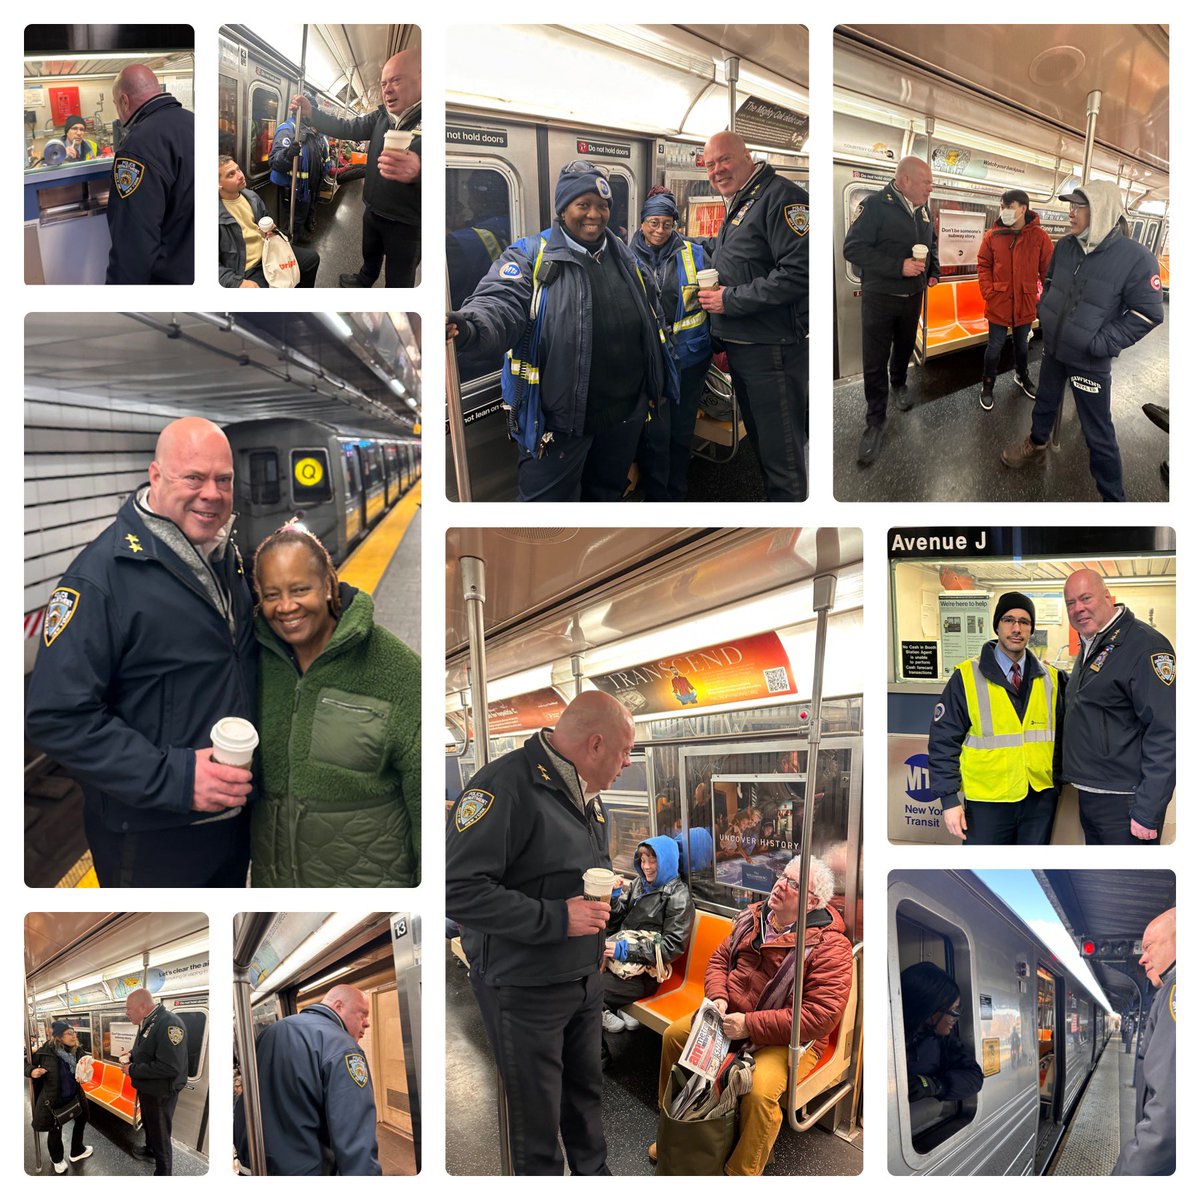 What a great morning spent speaking with everyday commuters as we rode the Q line from the Upper Eastside through Midtown Manhattan & into Brighton Beach Bklyn. We continue to all work together as we help keep the NYC Transit System safe. @NYPDDaughtry @NYPDChiefOfDept @NYPDPBMS